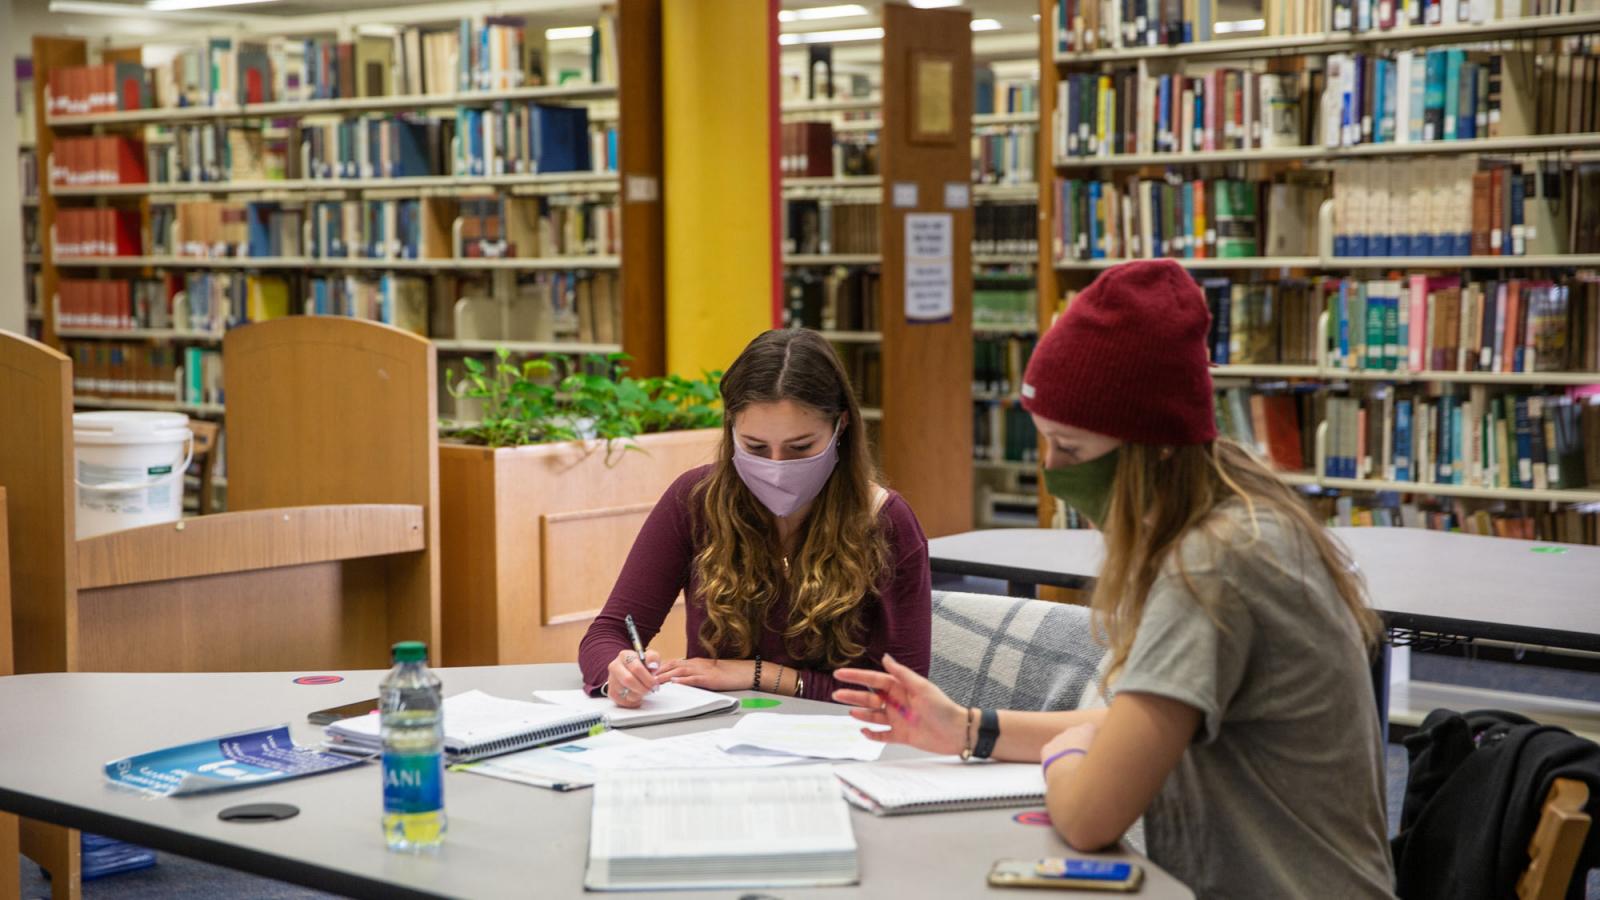 Students studying together in the library.